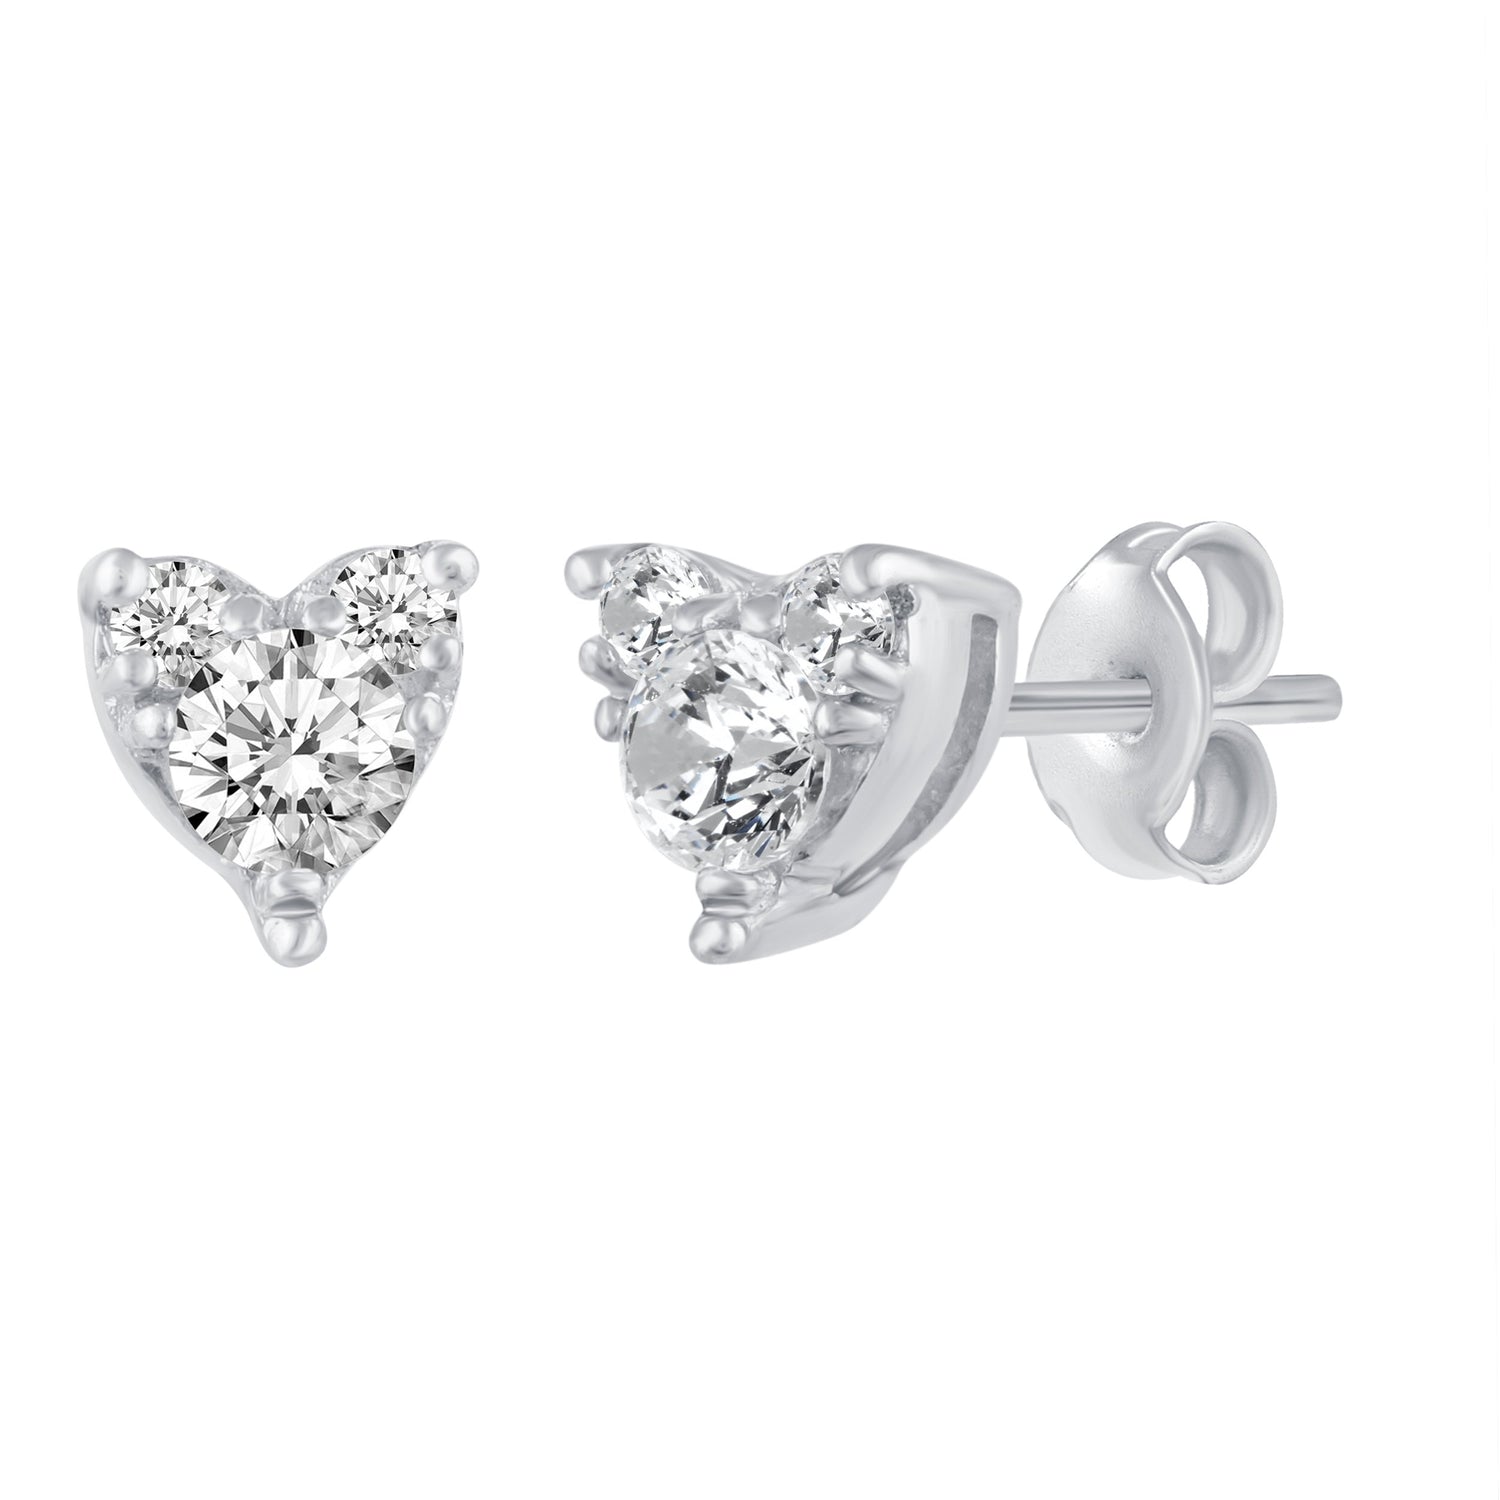 Heart 1/4 Ctw Natural Diamond Stud Earrings set in 925 Sterling Silver fine jewelry birthday holiday valentinesday gift under$100